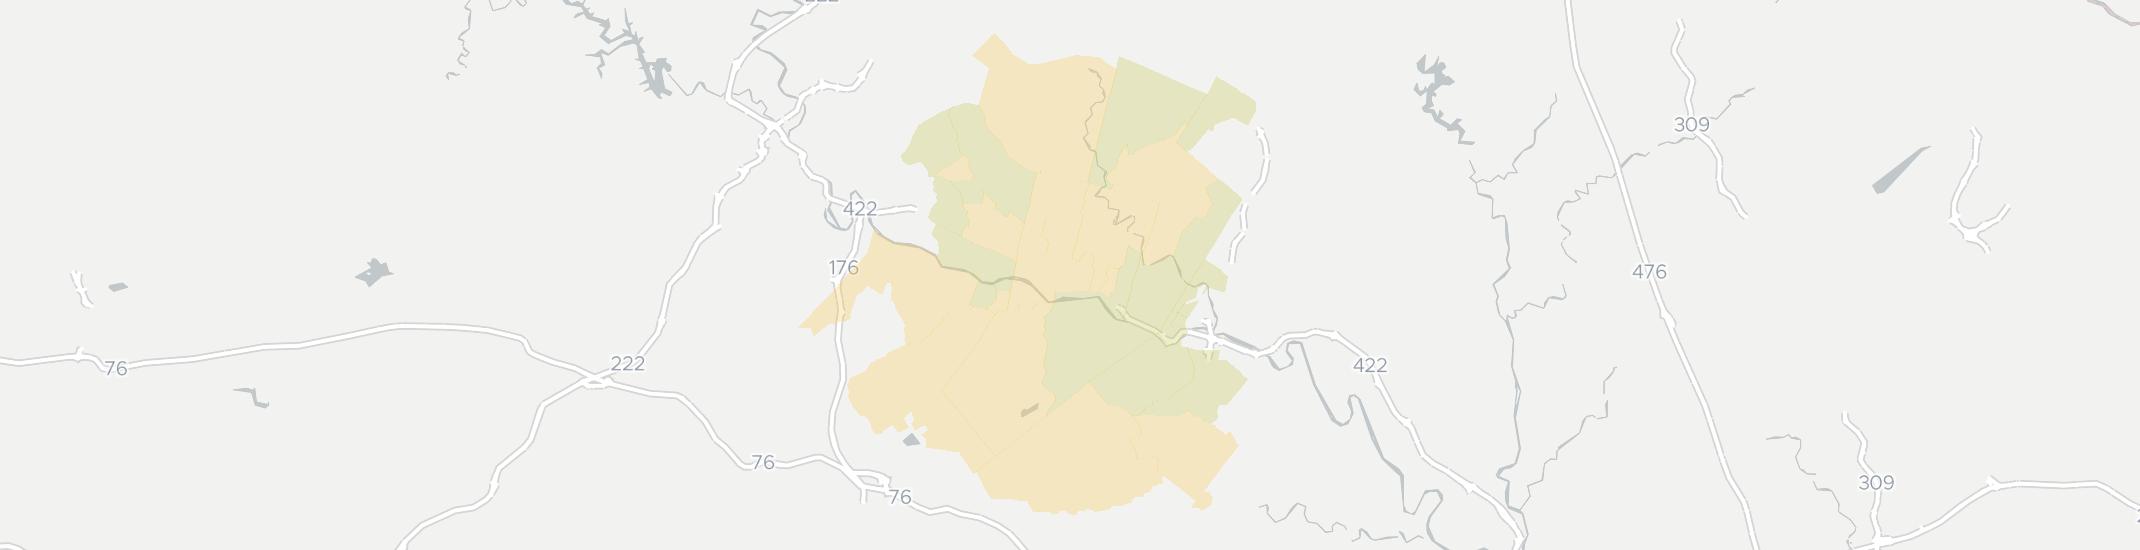 Douglassville Internet Competition Map. Click for interactive map.